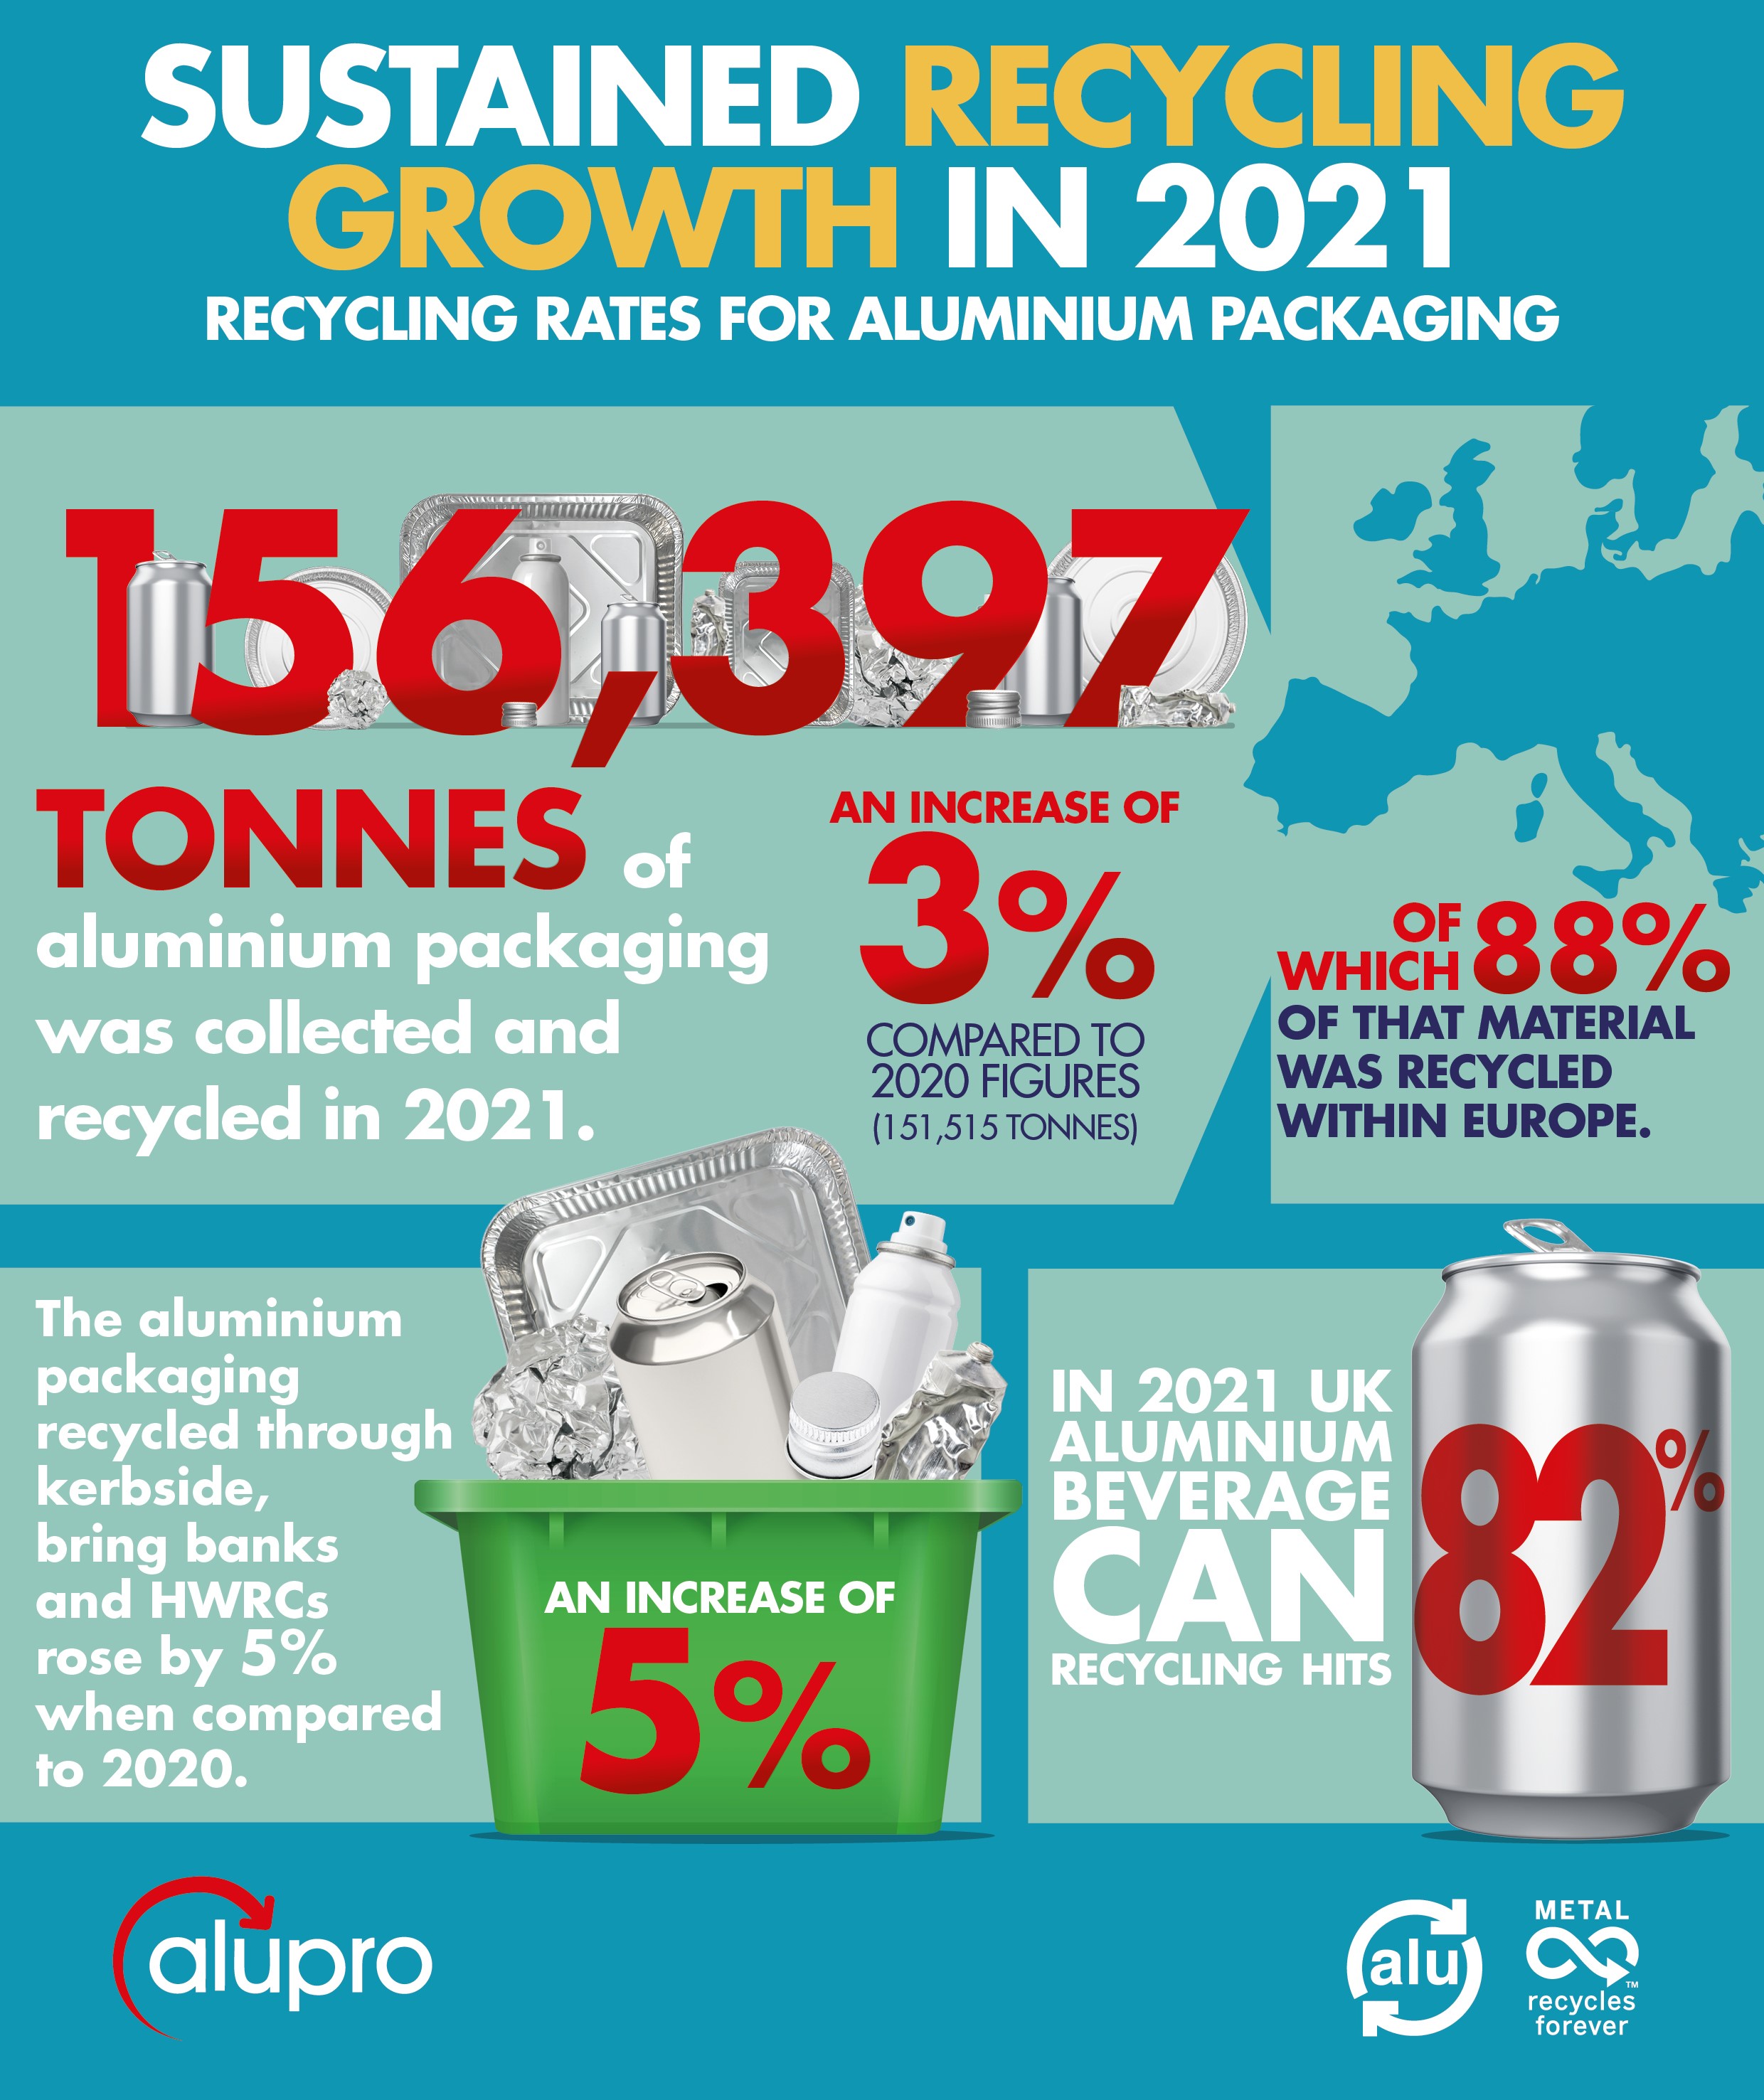 UK's aluminium packaging recycling rate creates a new benchmark in 2021: Alupro